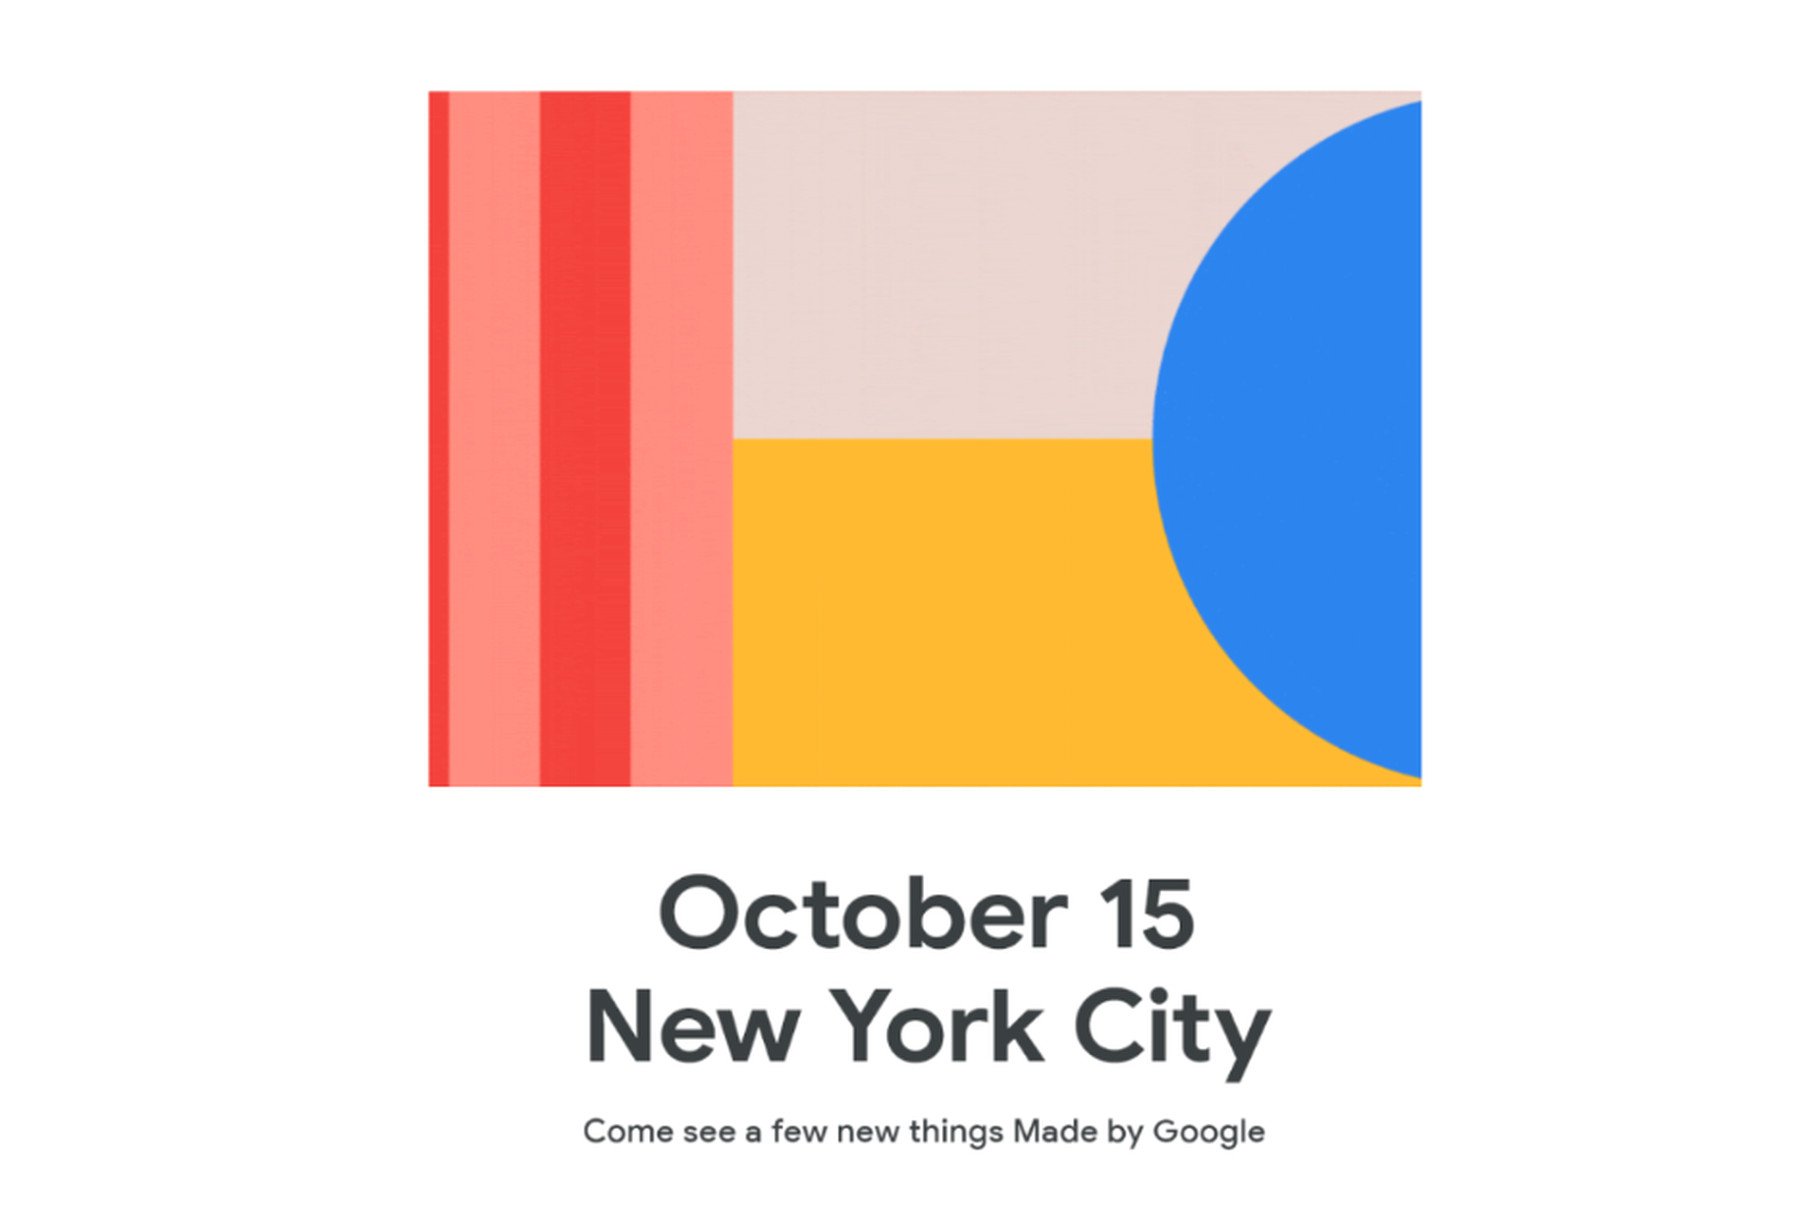 Made by Google October 15 